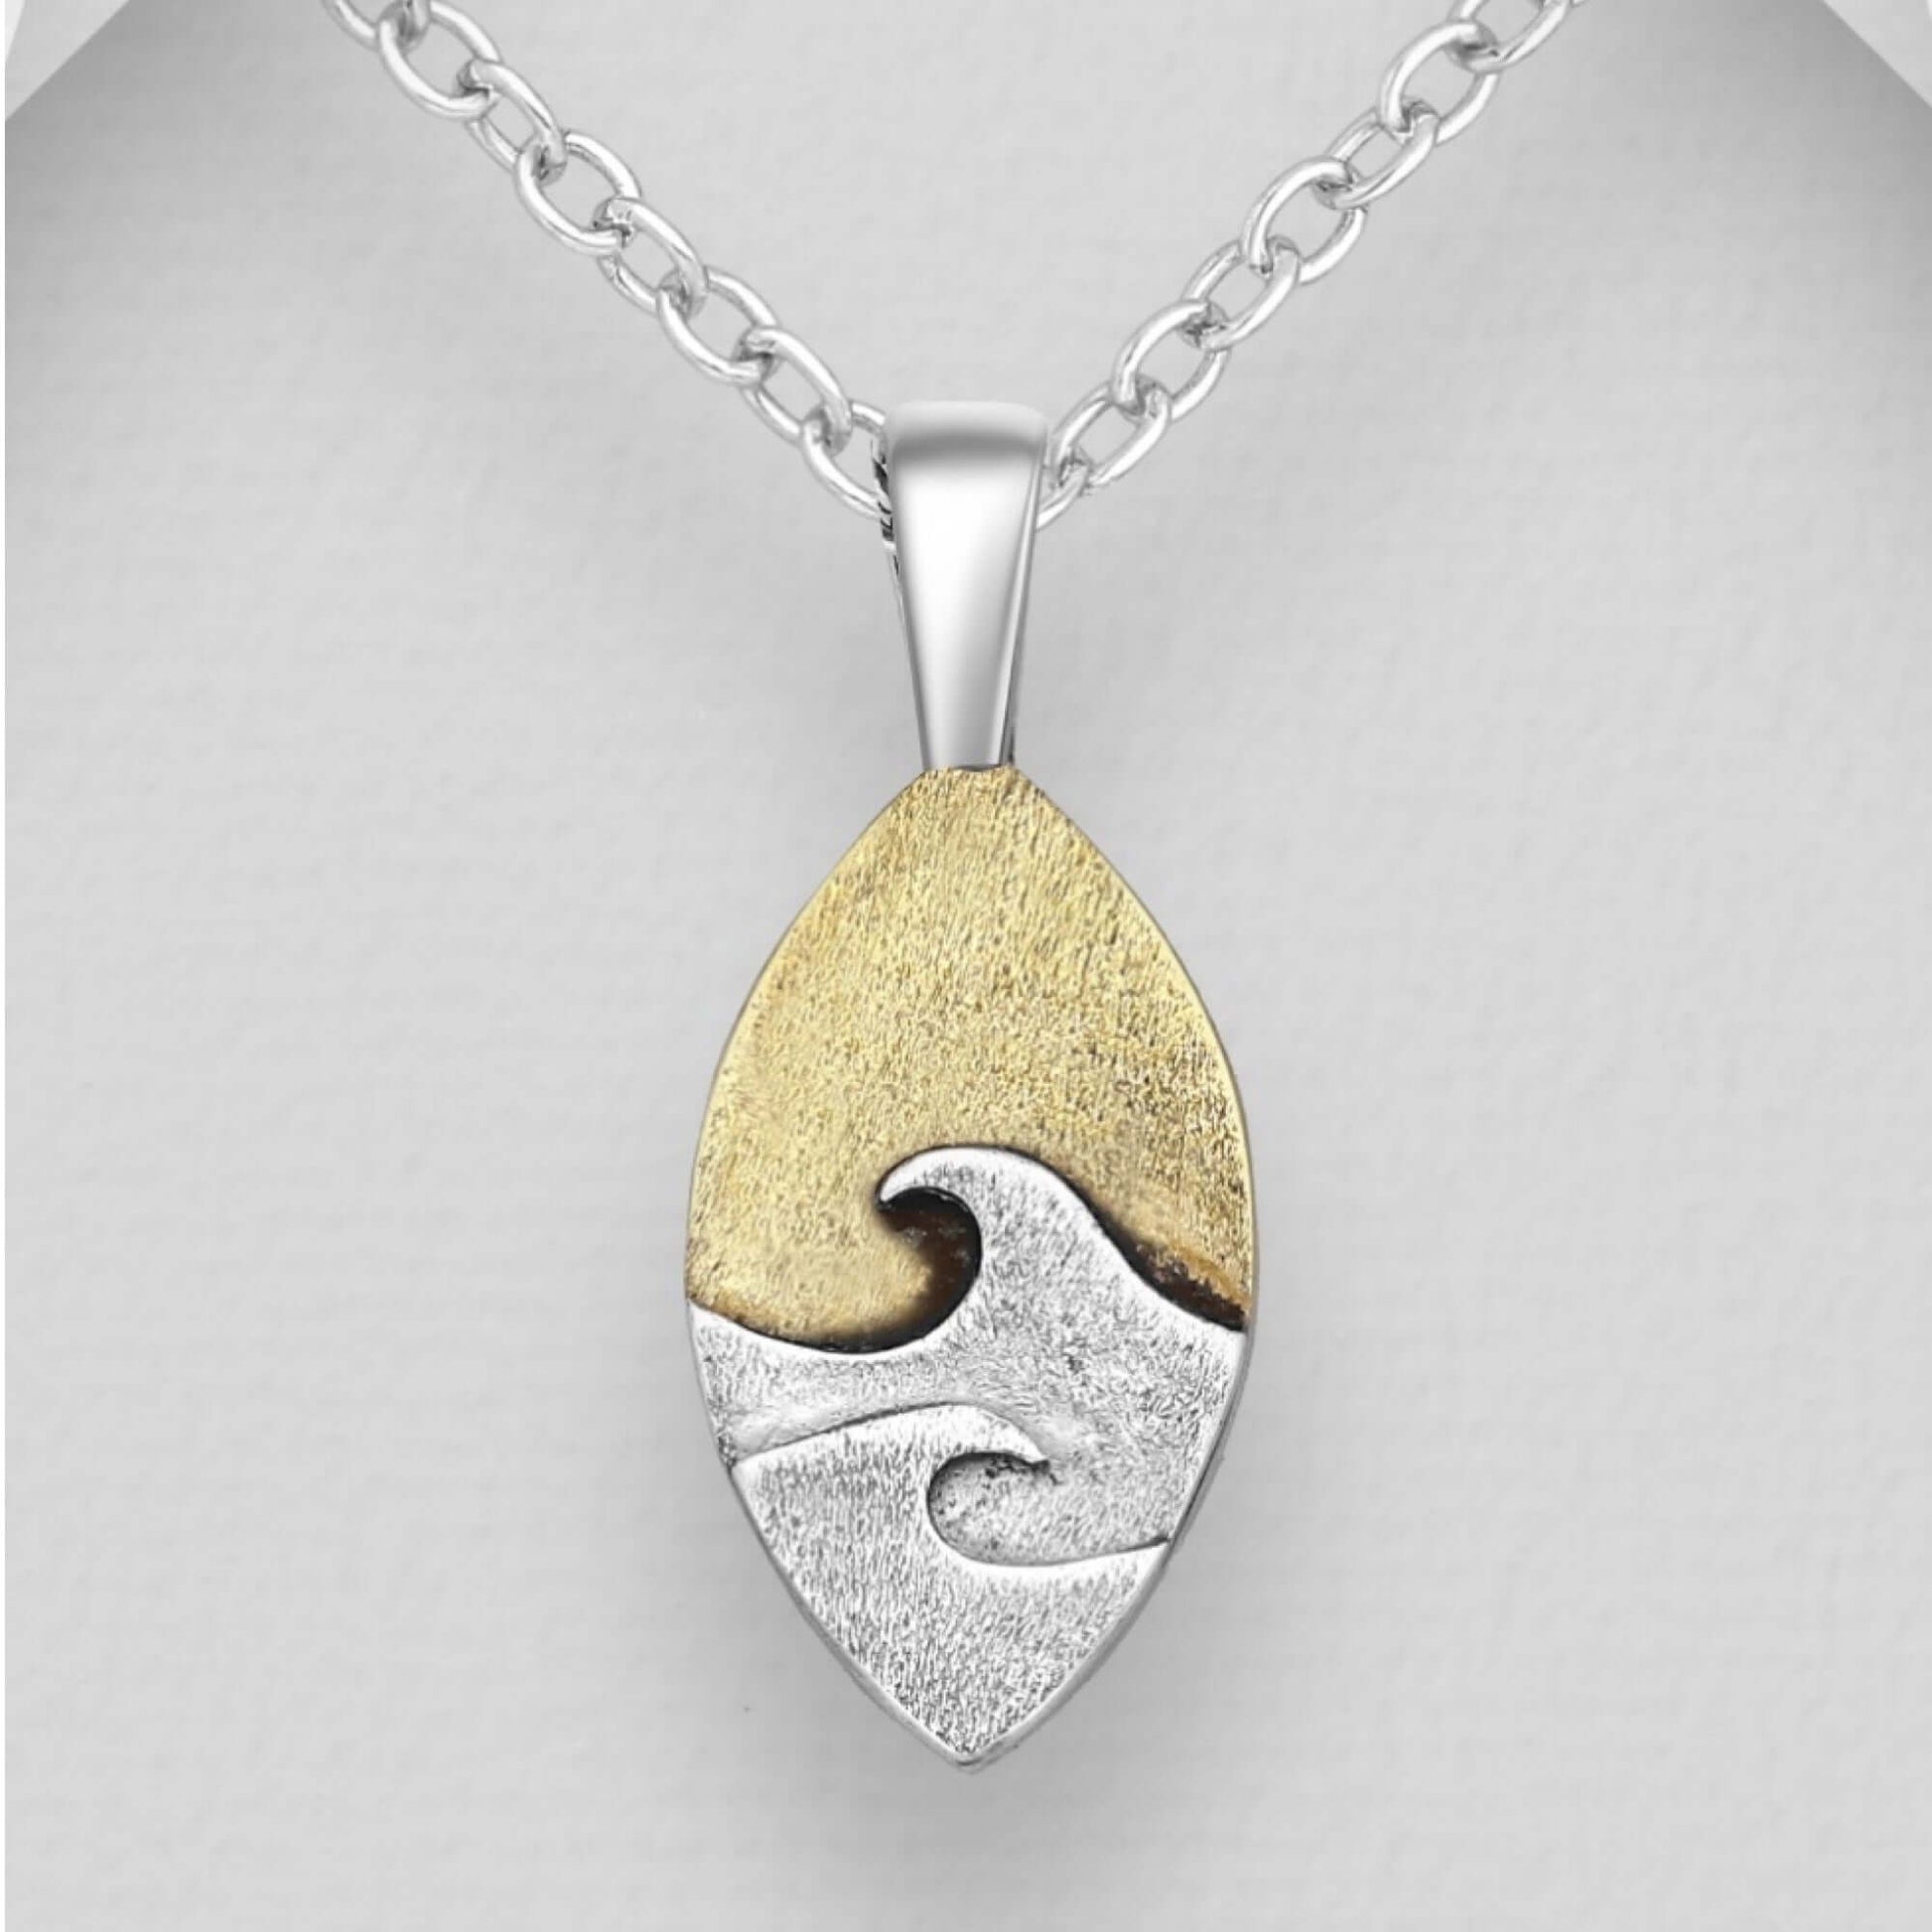 Japanese Inspired Wave Sterling Silver & Brass Pendant - Twelve Silver Trees